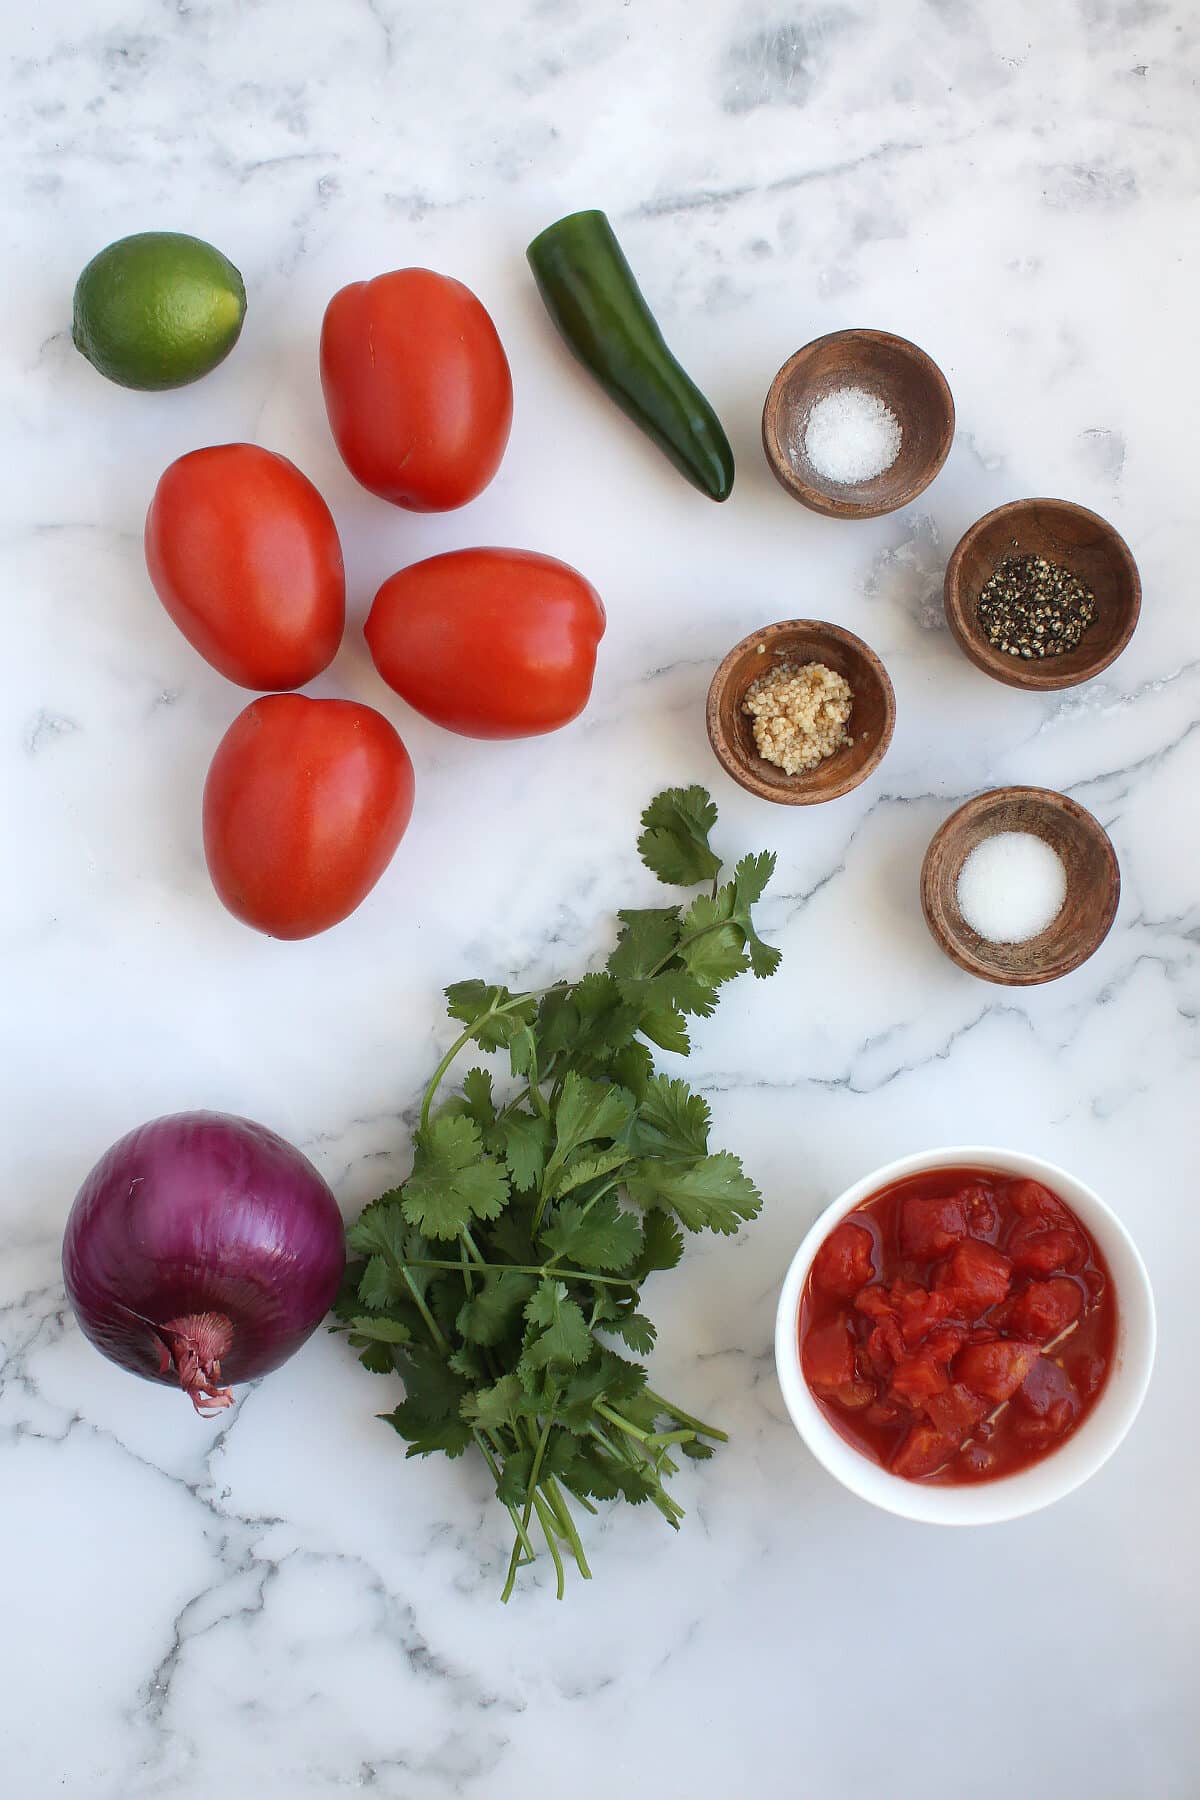 Ingredients for making homemade salsa